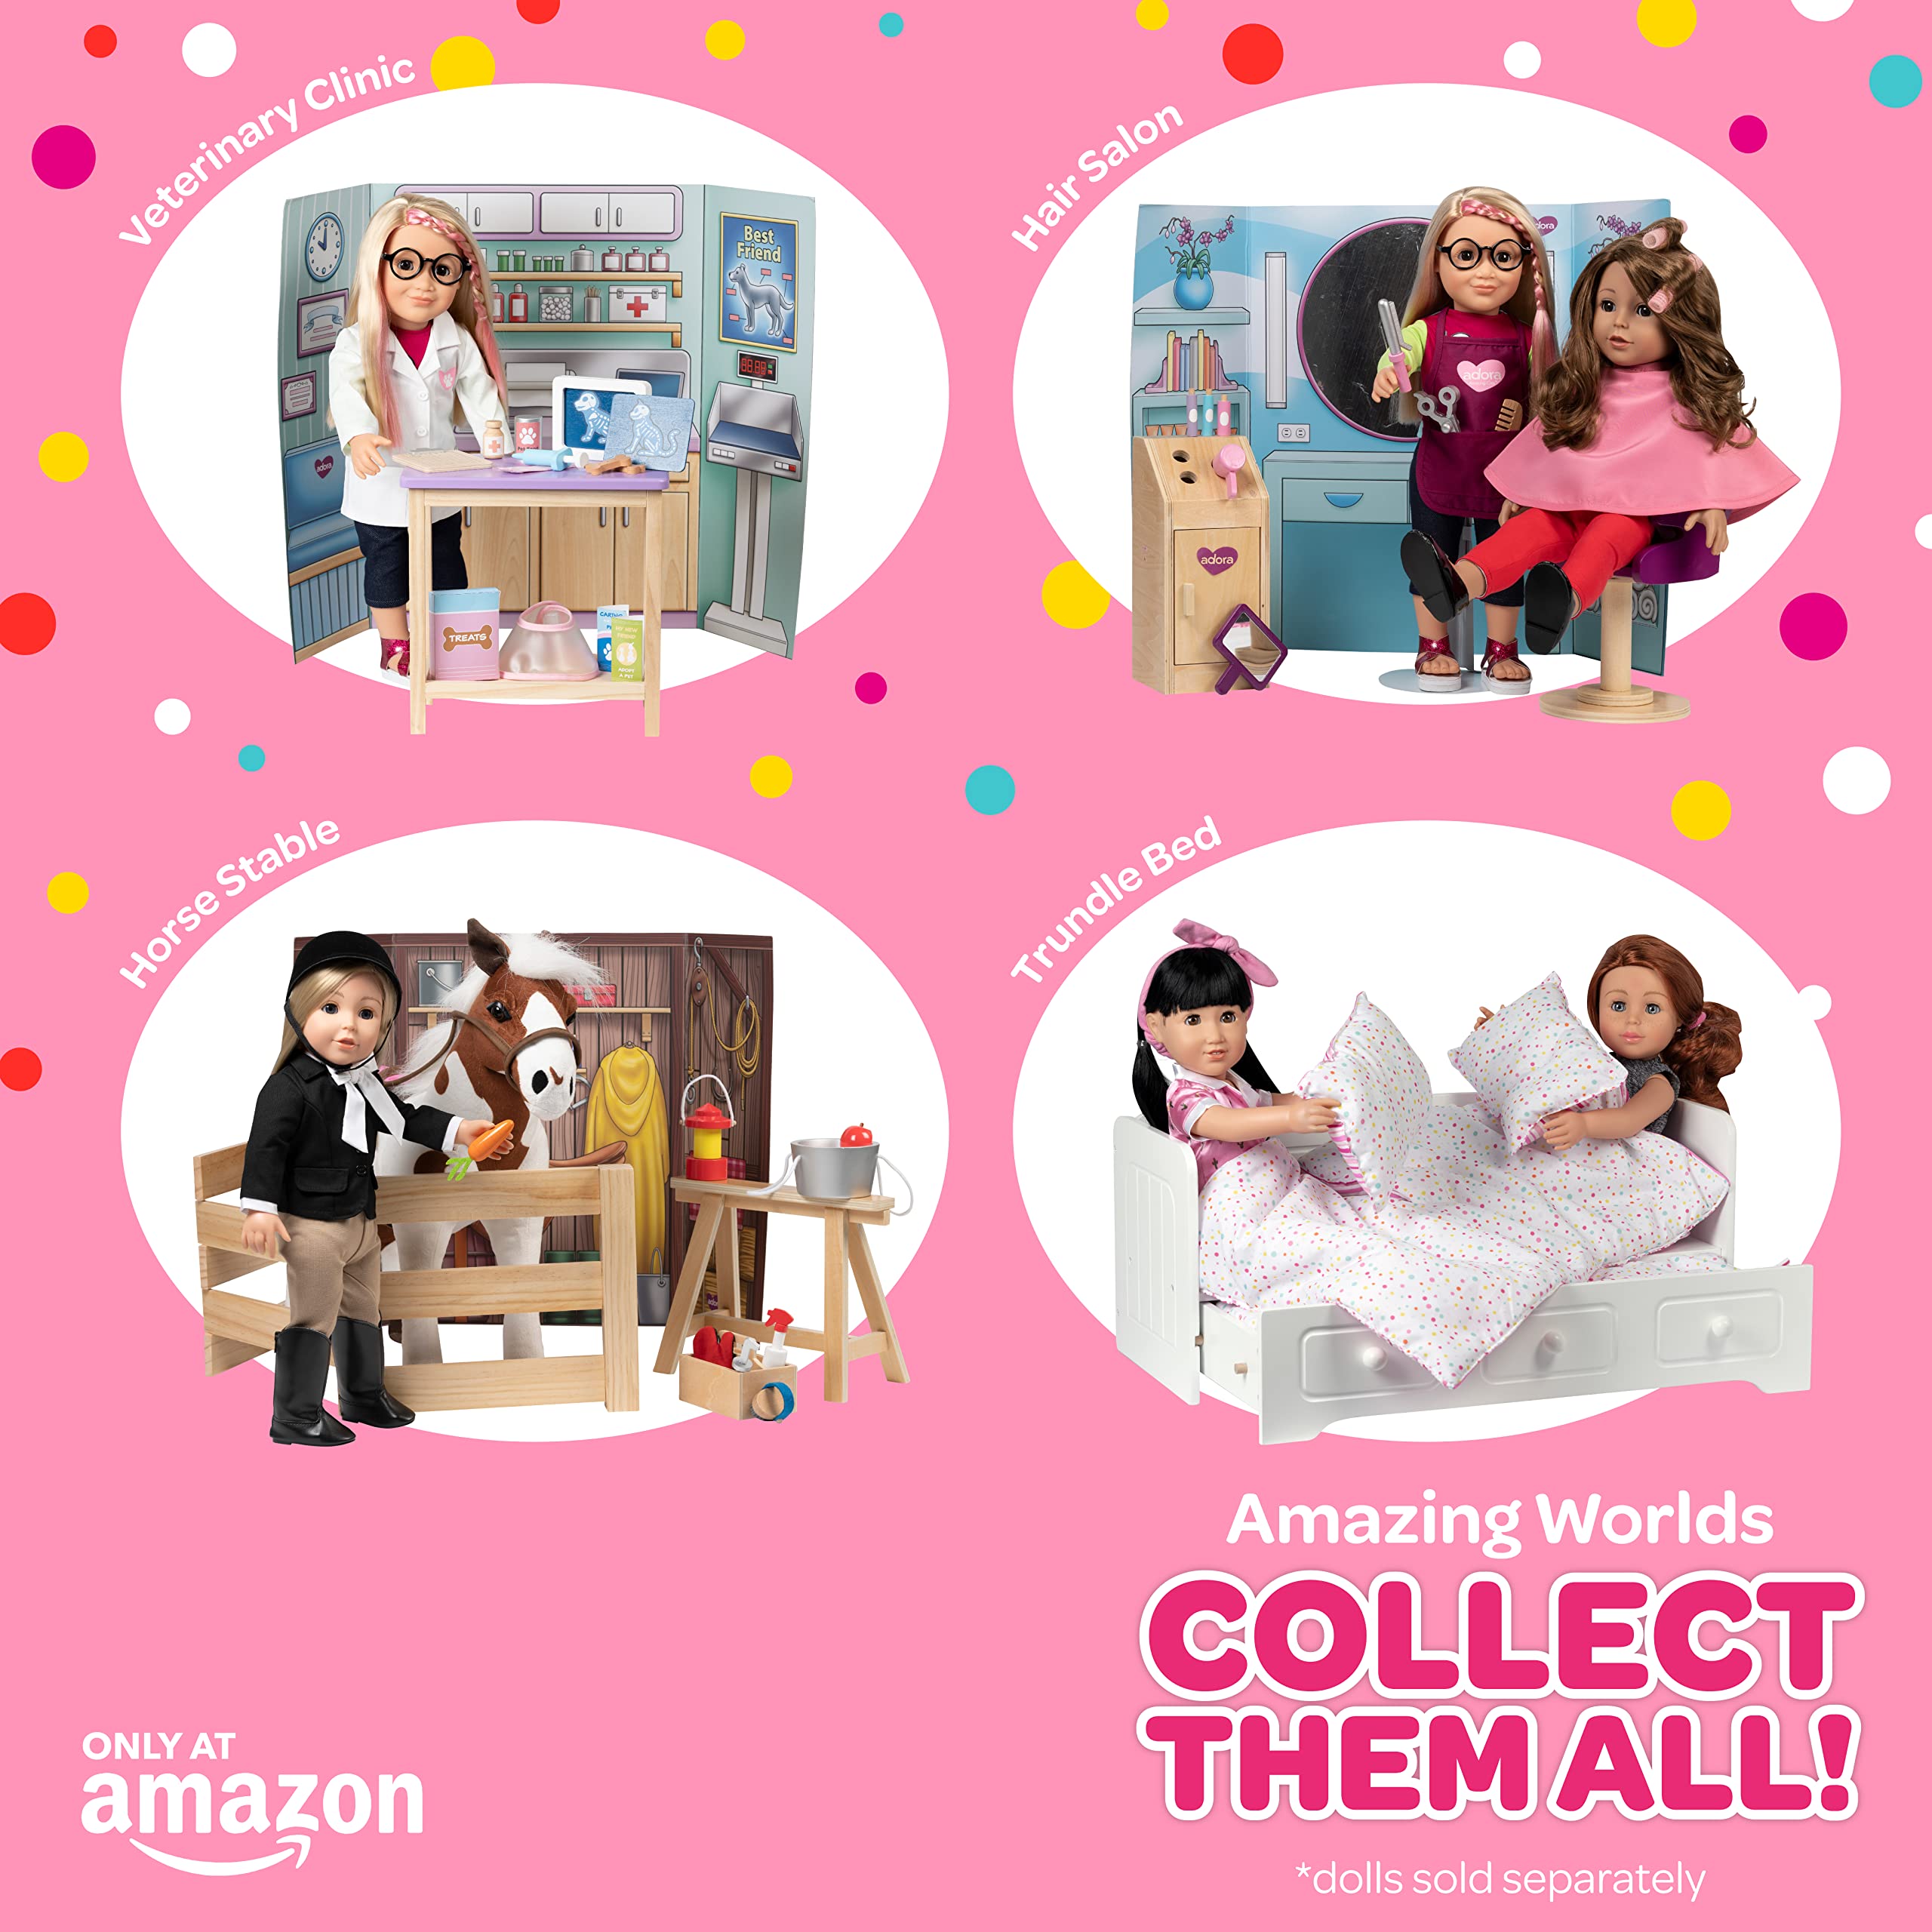 Adora Amazing World “Artist Studio Wooden Play Set” 16 Piece Accessory Set for 18” Dolls Including Amazing Girls and American Girl Dolls (218893)